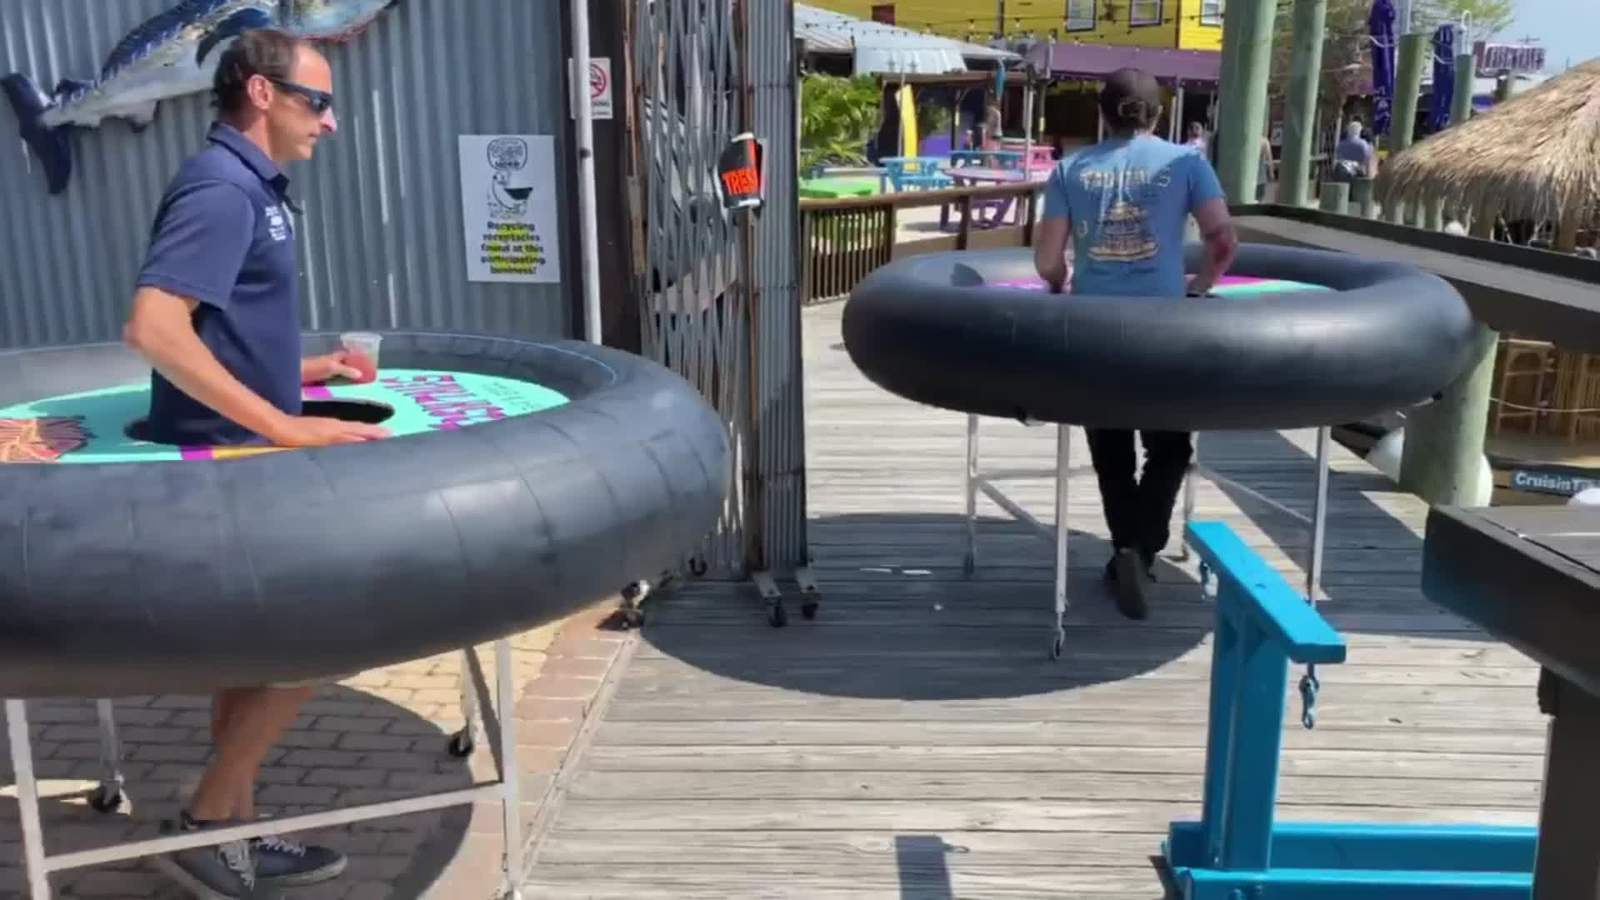 A restaurant’s new tables have huge inner tubes that make social distancing look fun